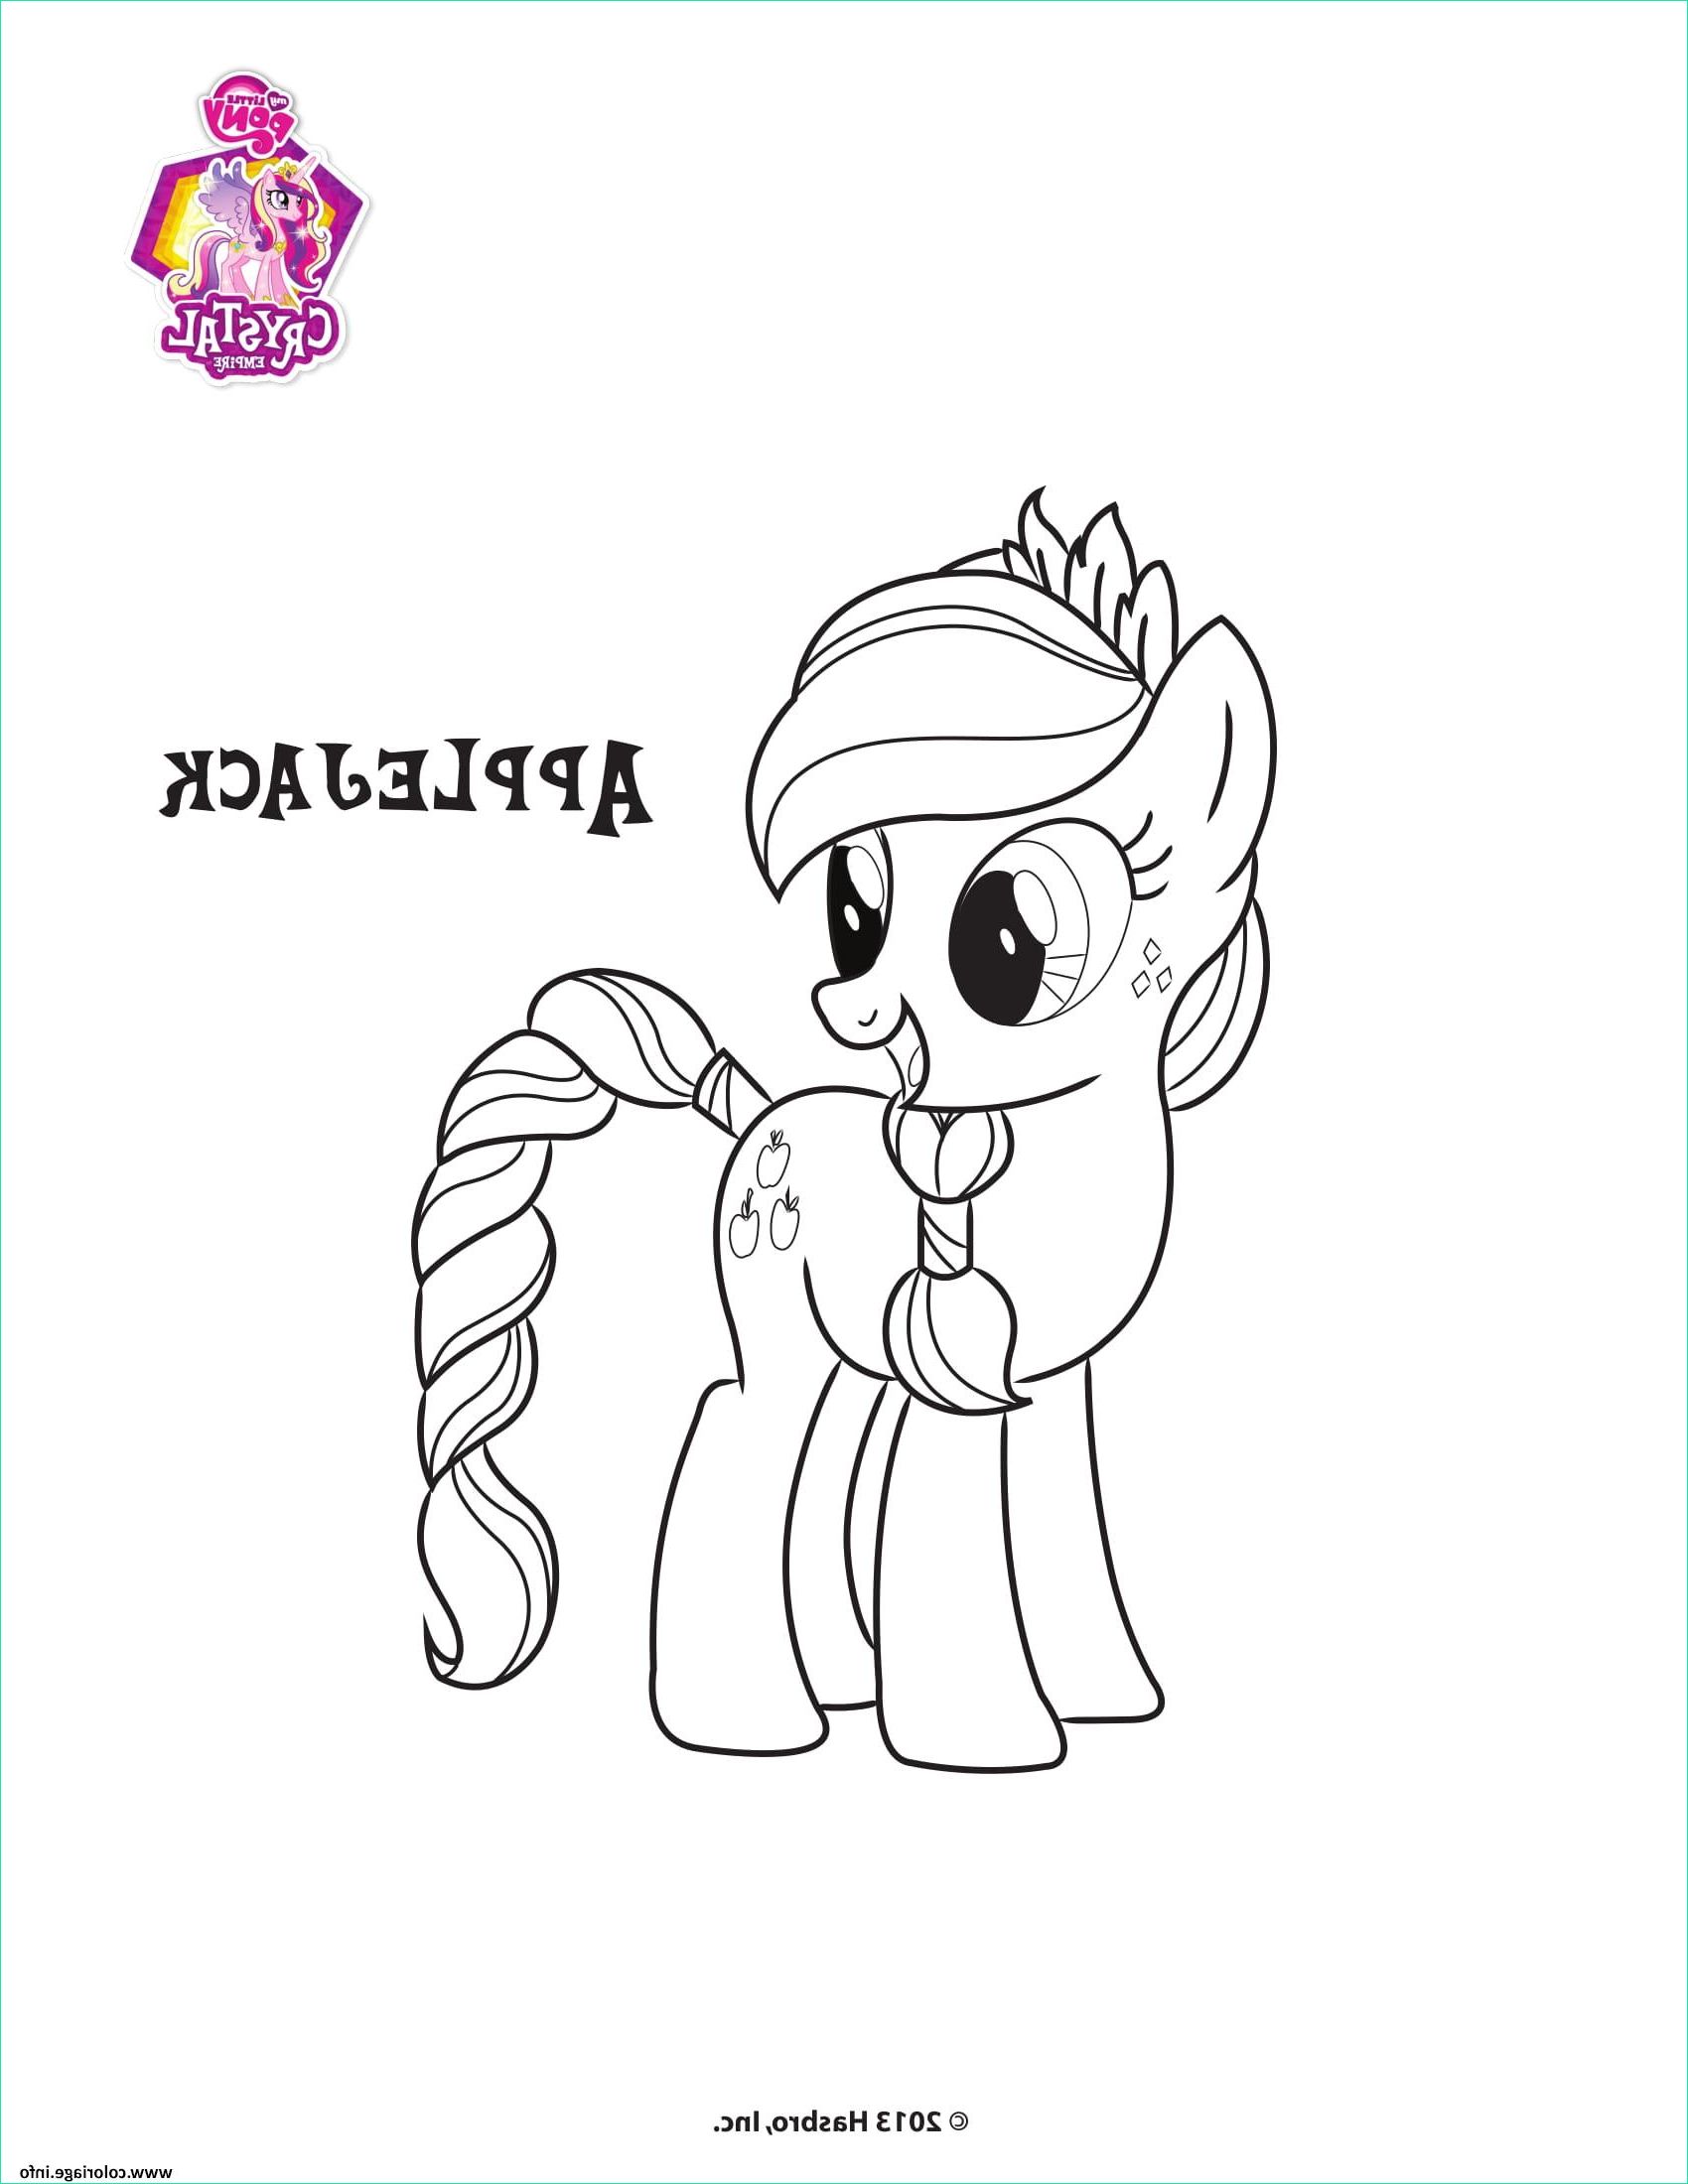 Coloriage My Little Pony Le Film Impressionnant Photographie Coloriage Applejack Crystal Empire My Little Pony Dessin